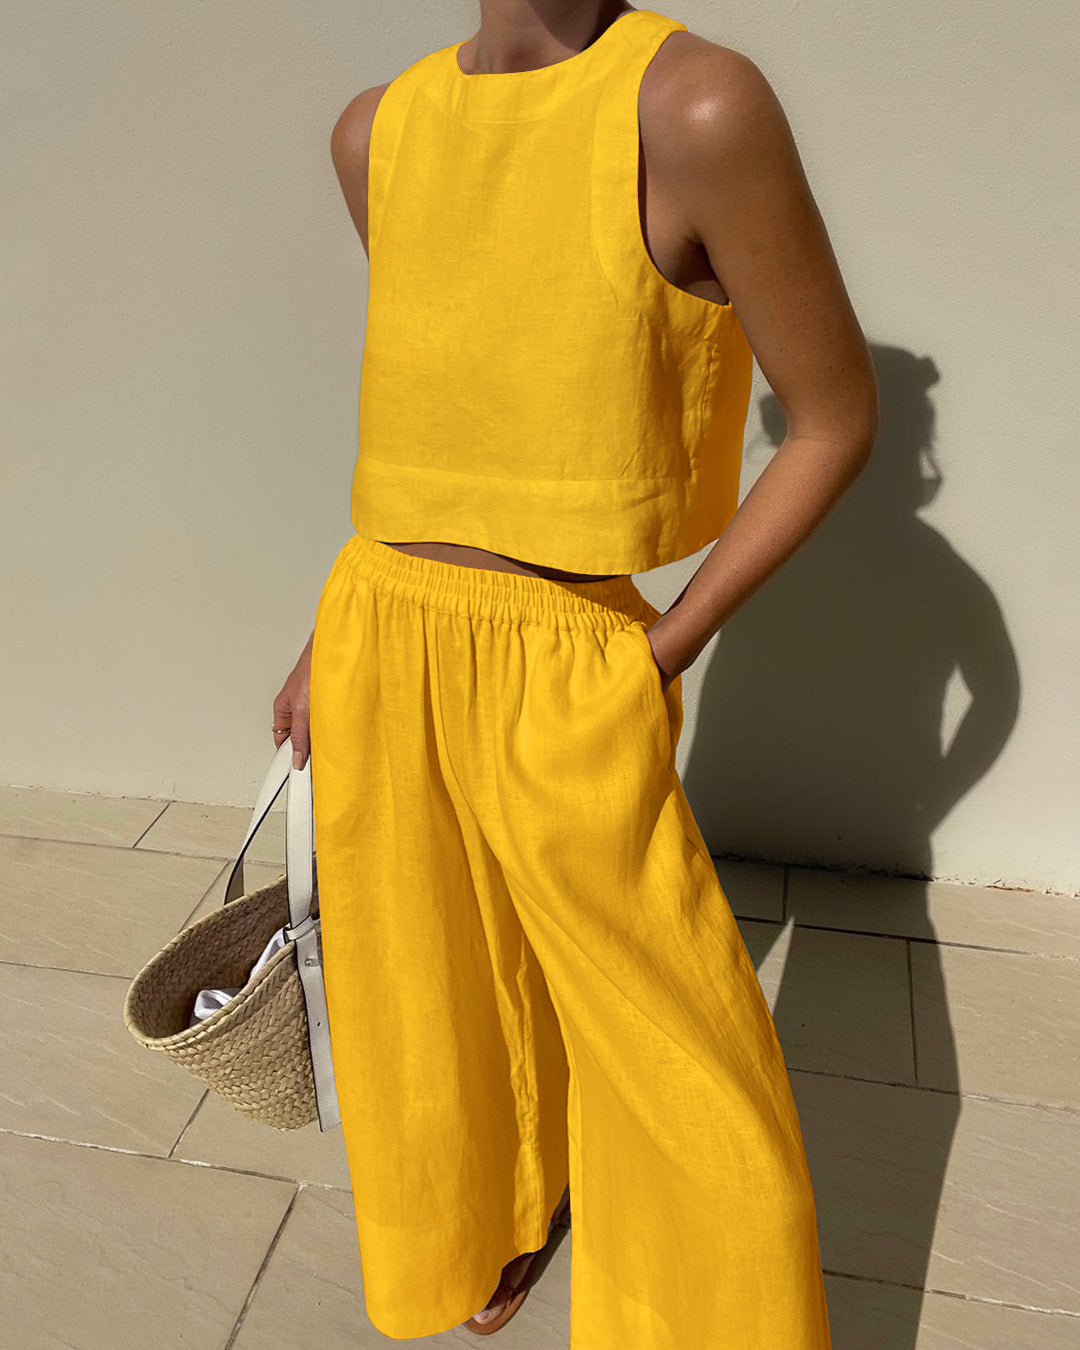 NTG Fad SUIT Yellow / S Chic Solid Linen Sleeveless 2-Piece Set